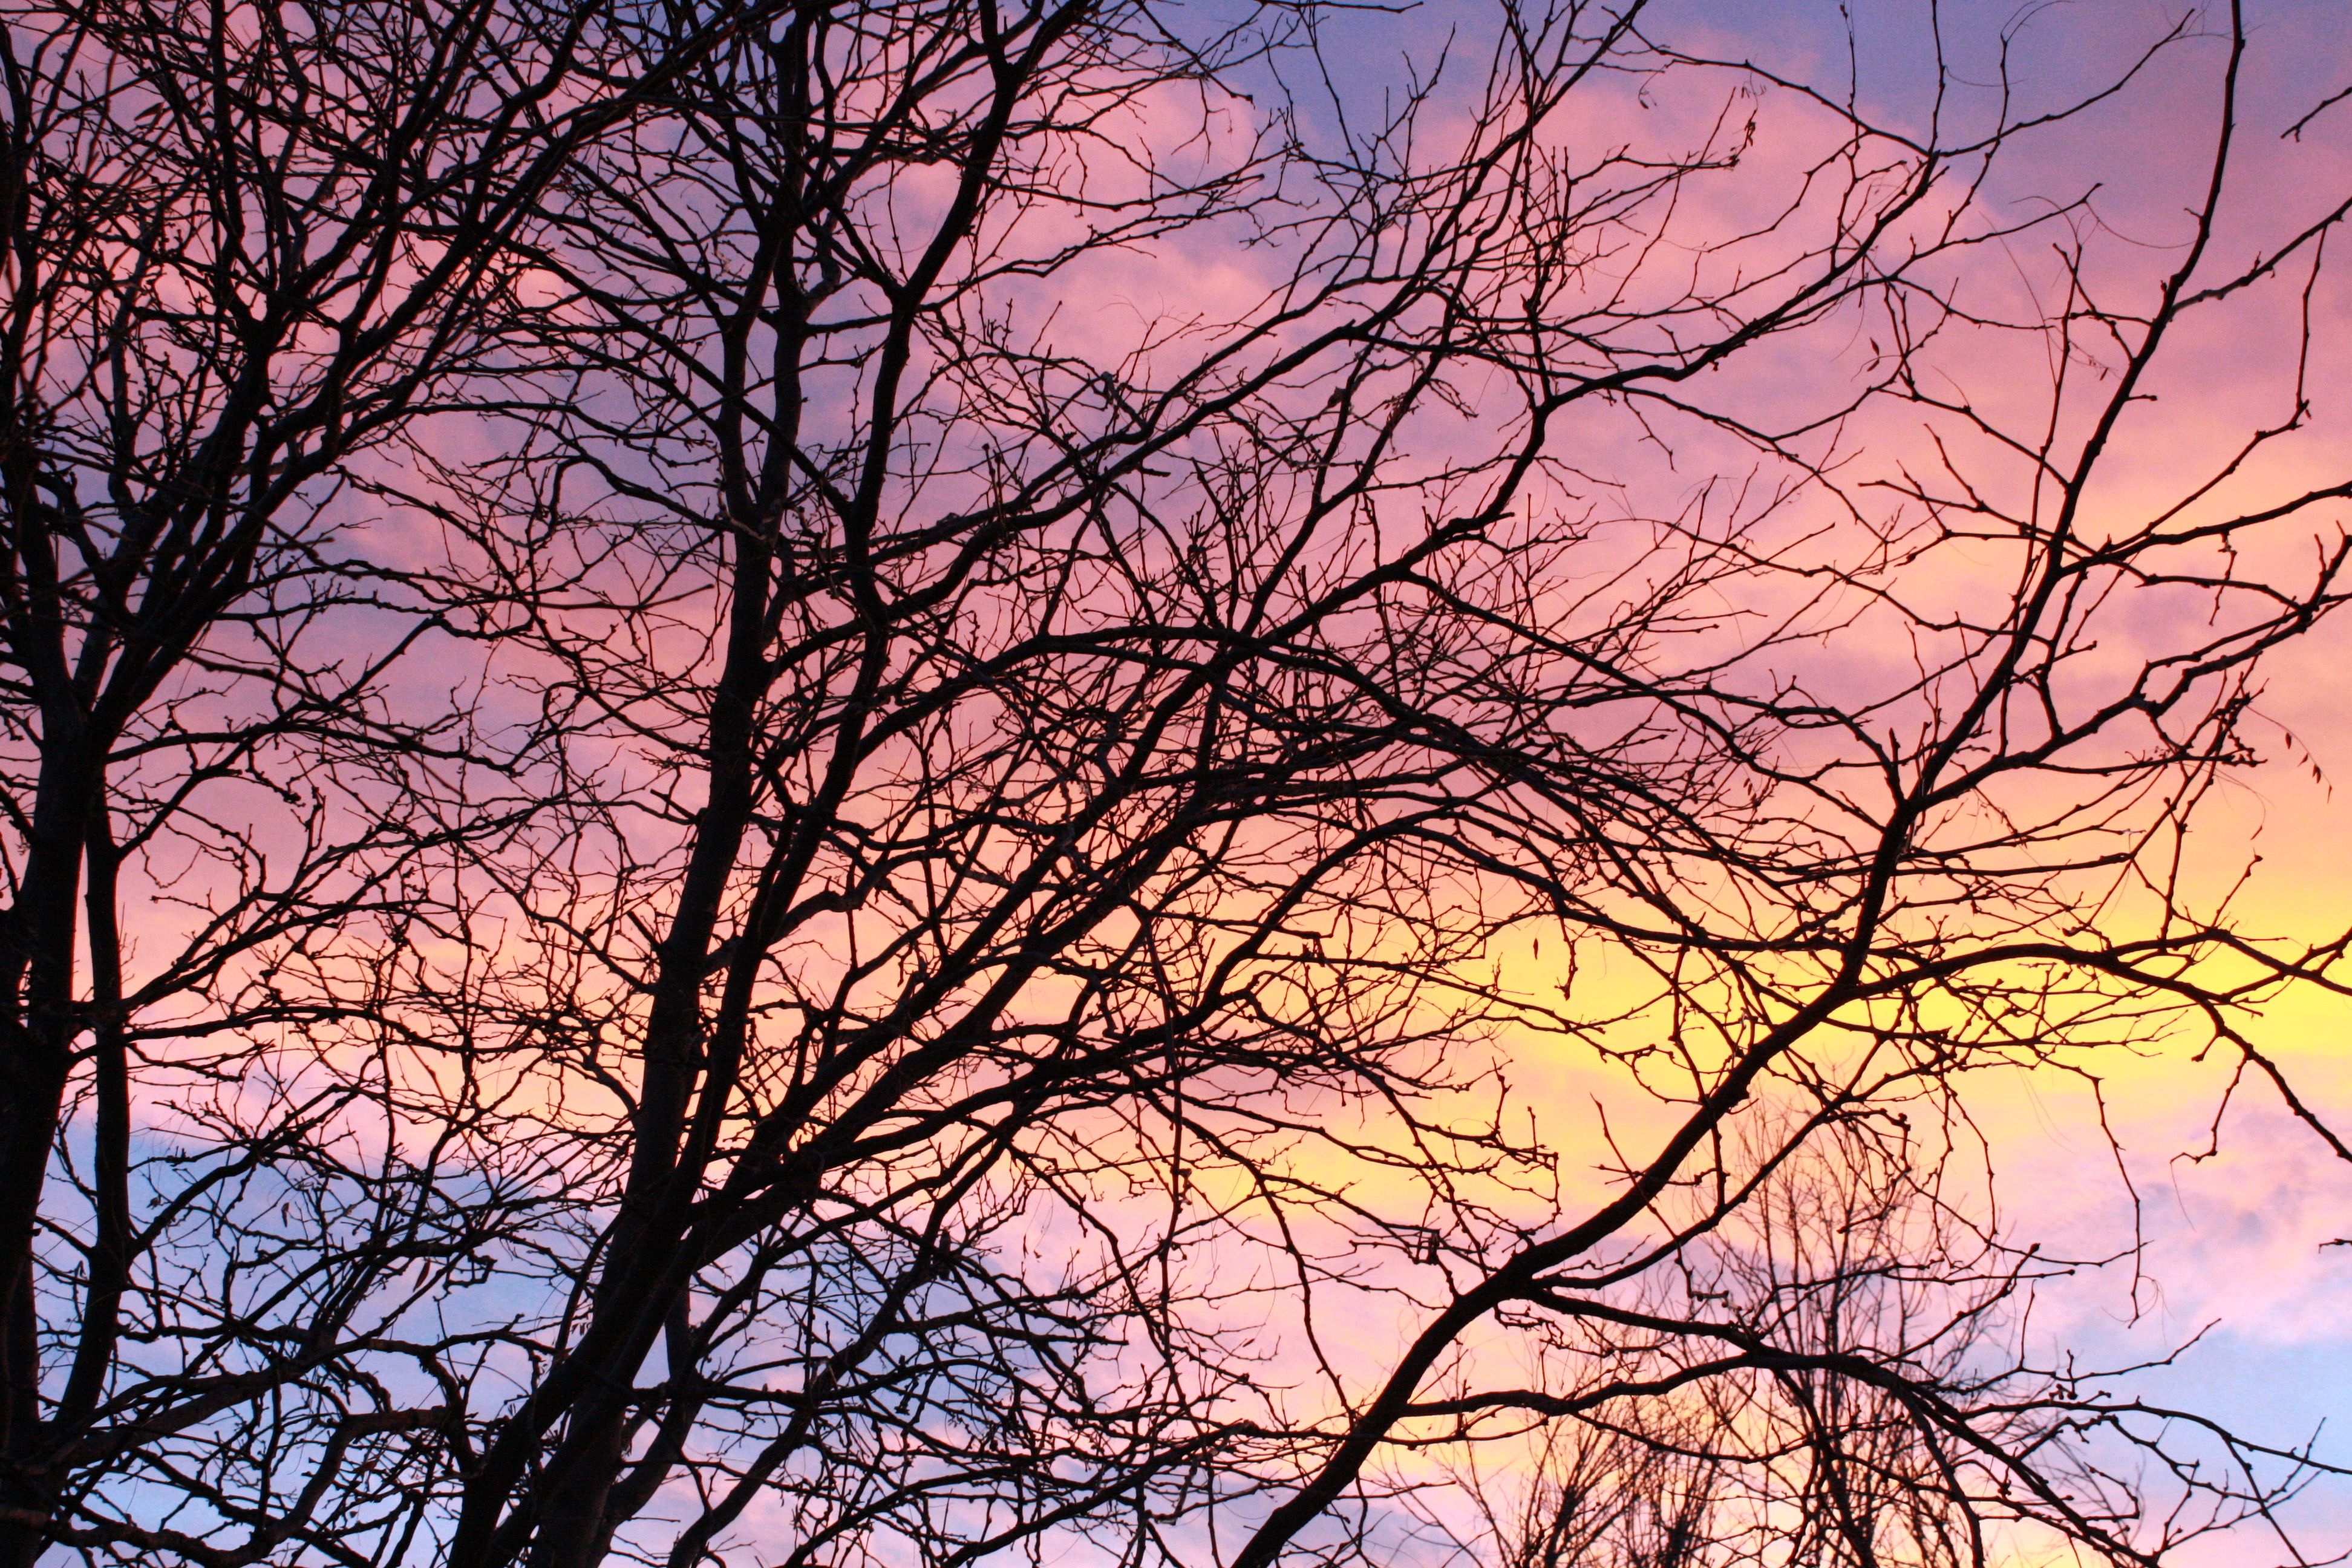 Pastel Sunset Through Tree Branches Picture | Free Photograph | Photos